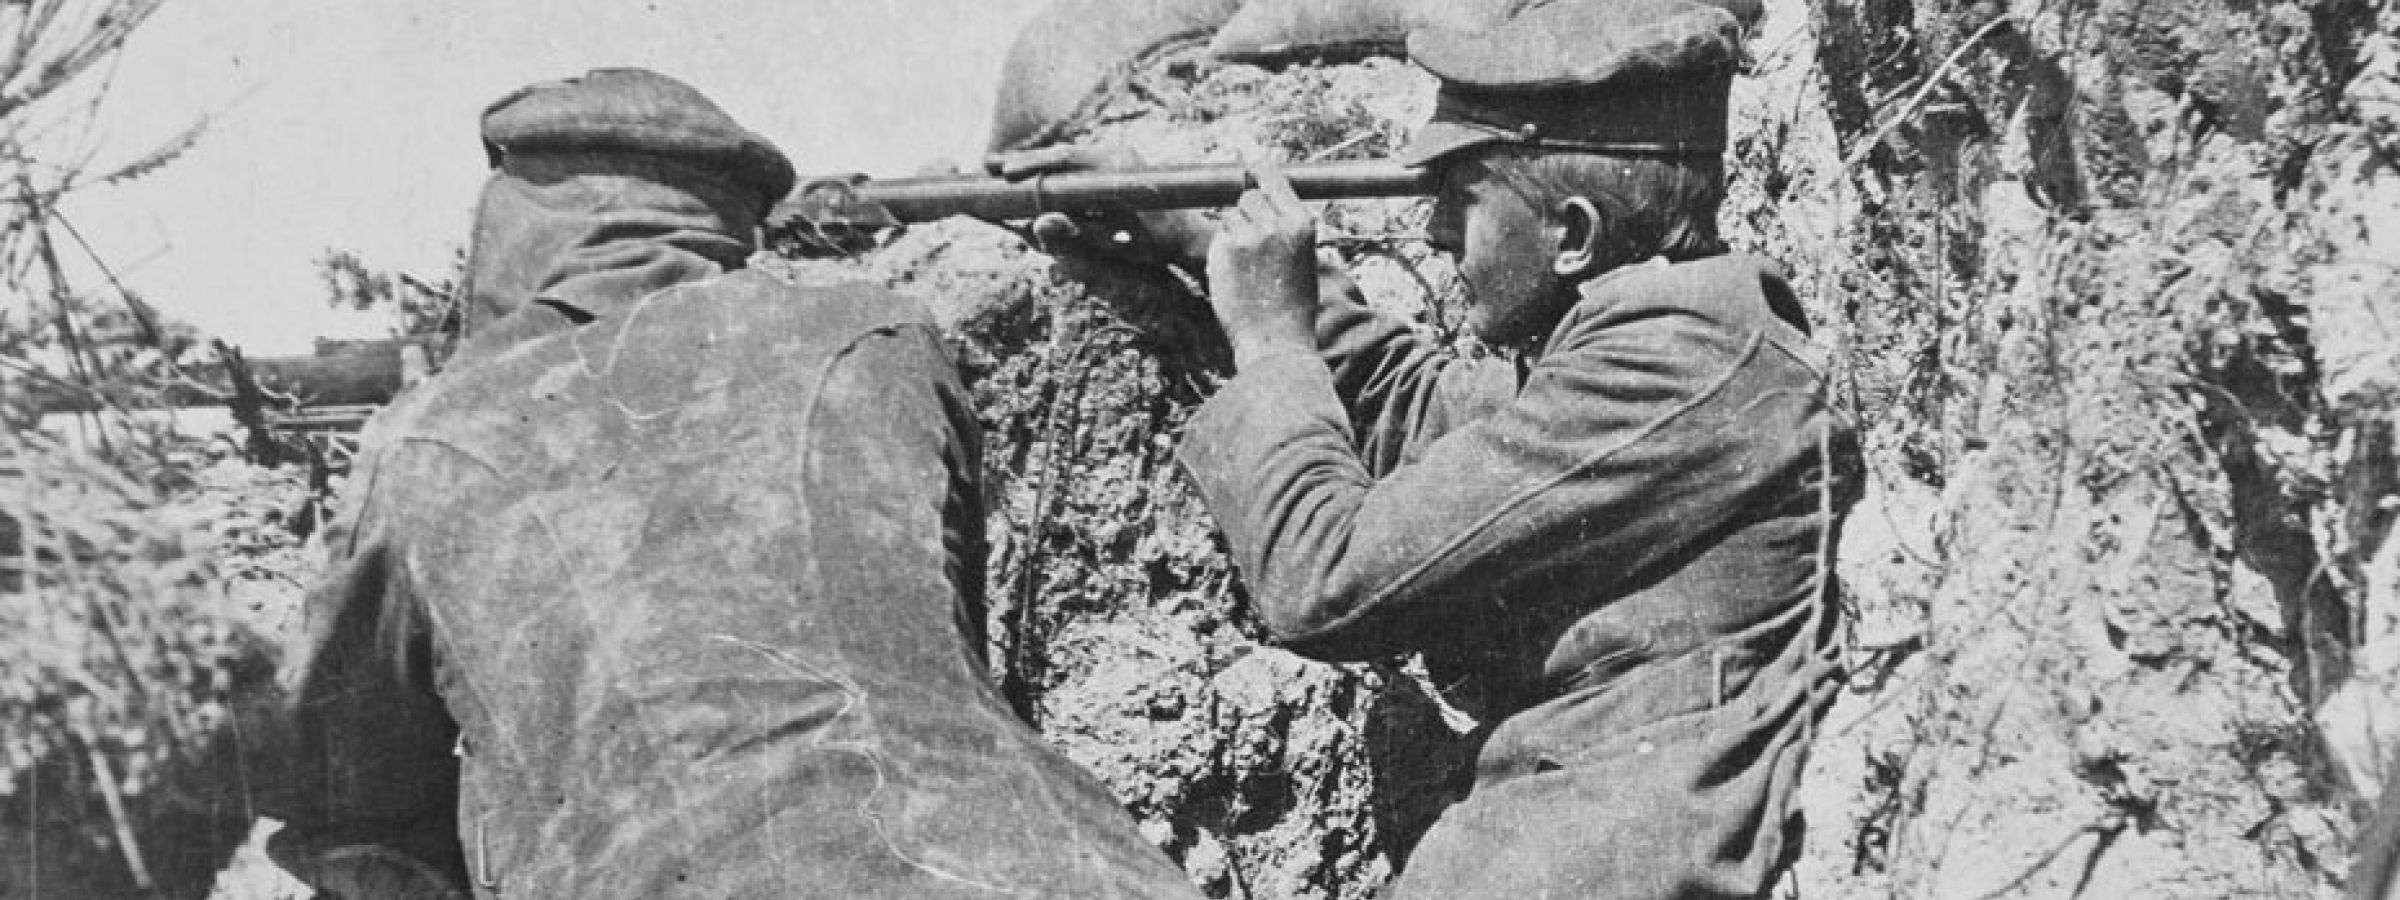 A sniper team - one soldier holds a rifle and the other a periscope